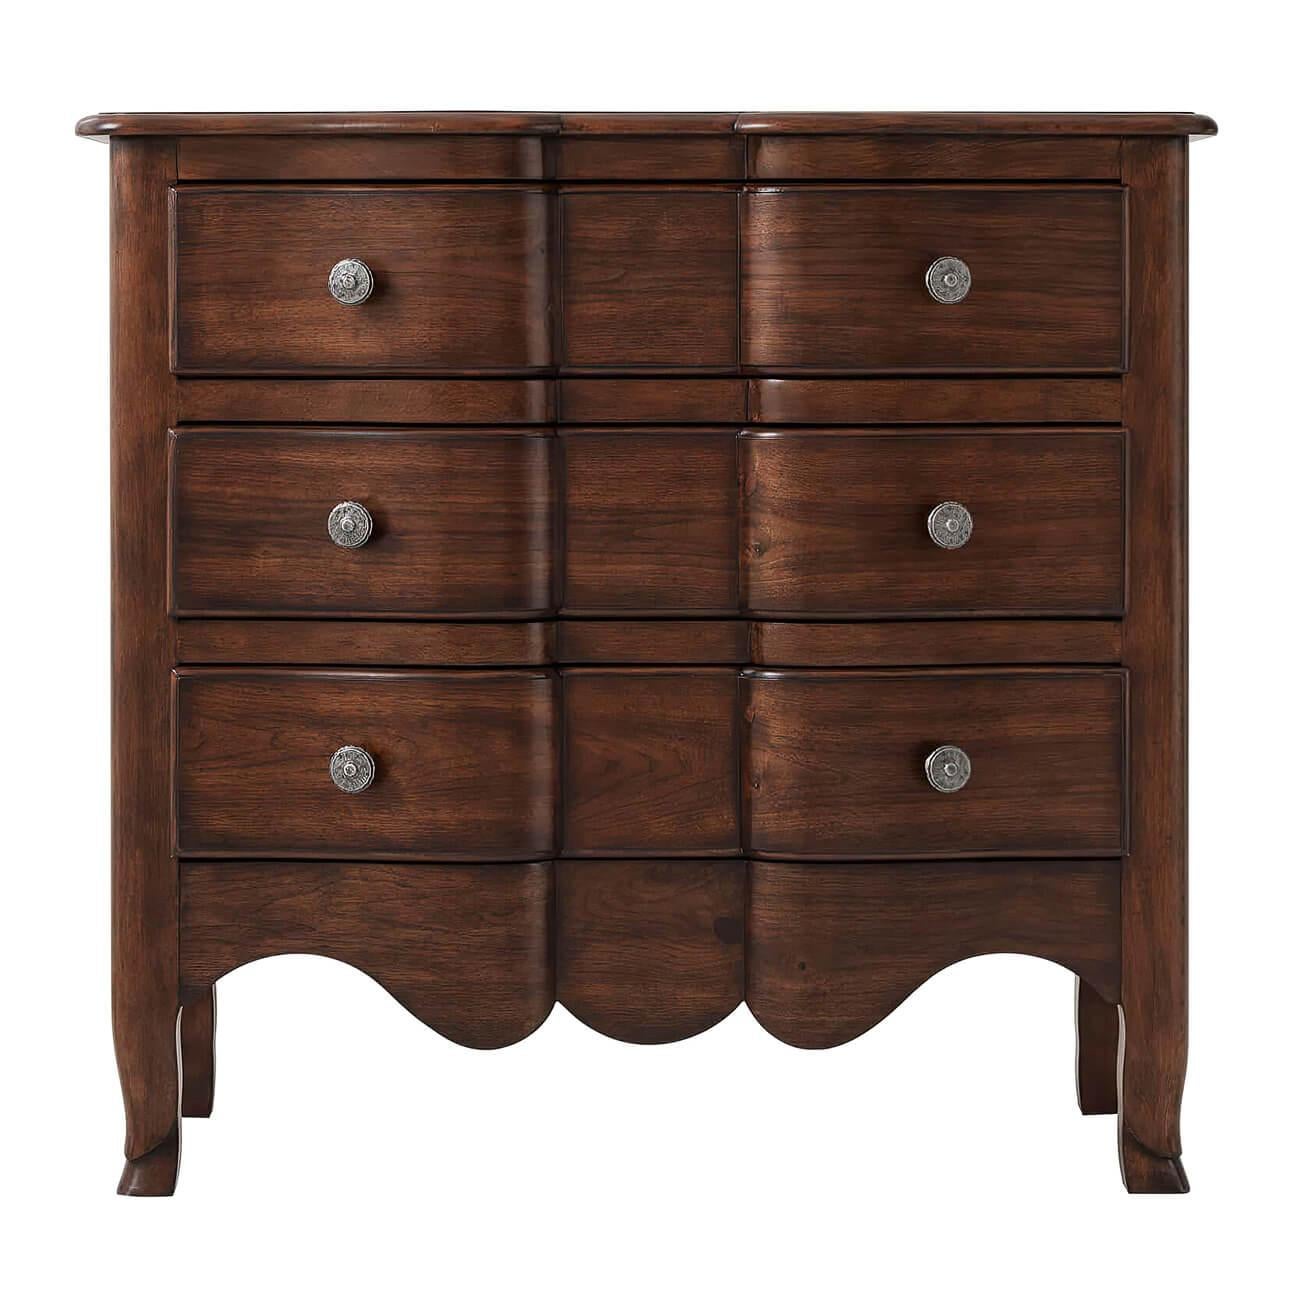 A French Provincial three-drawer serpentine walnut commode with a molded serpentine form top, shaped serpentine drawers with antiqued pewter handles, paneled sides, a scalloped apron, and hoof feet. 

Dimensions: 36